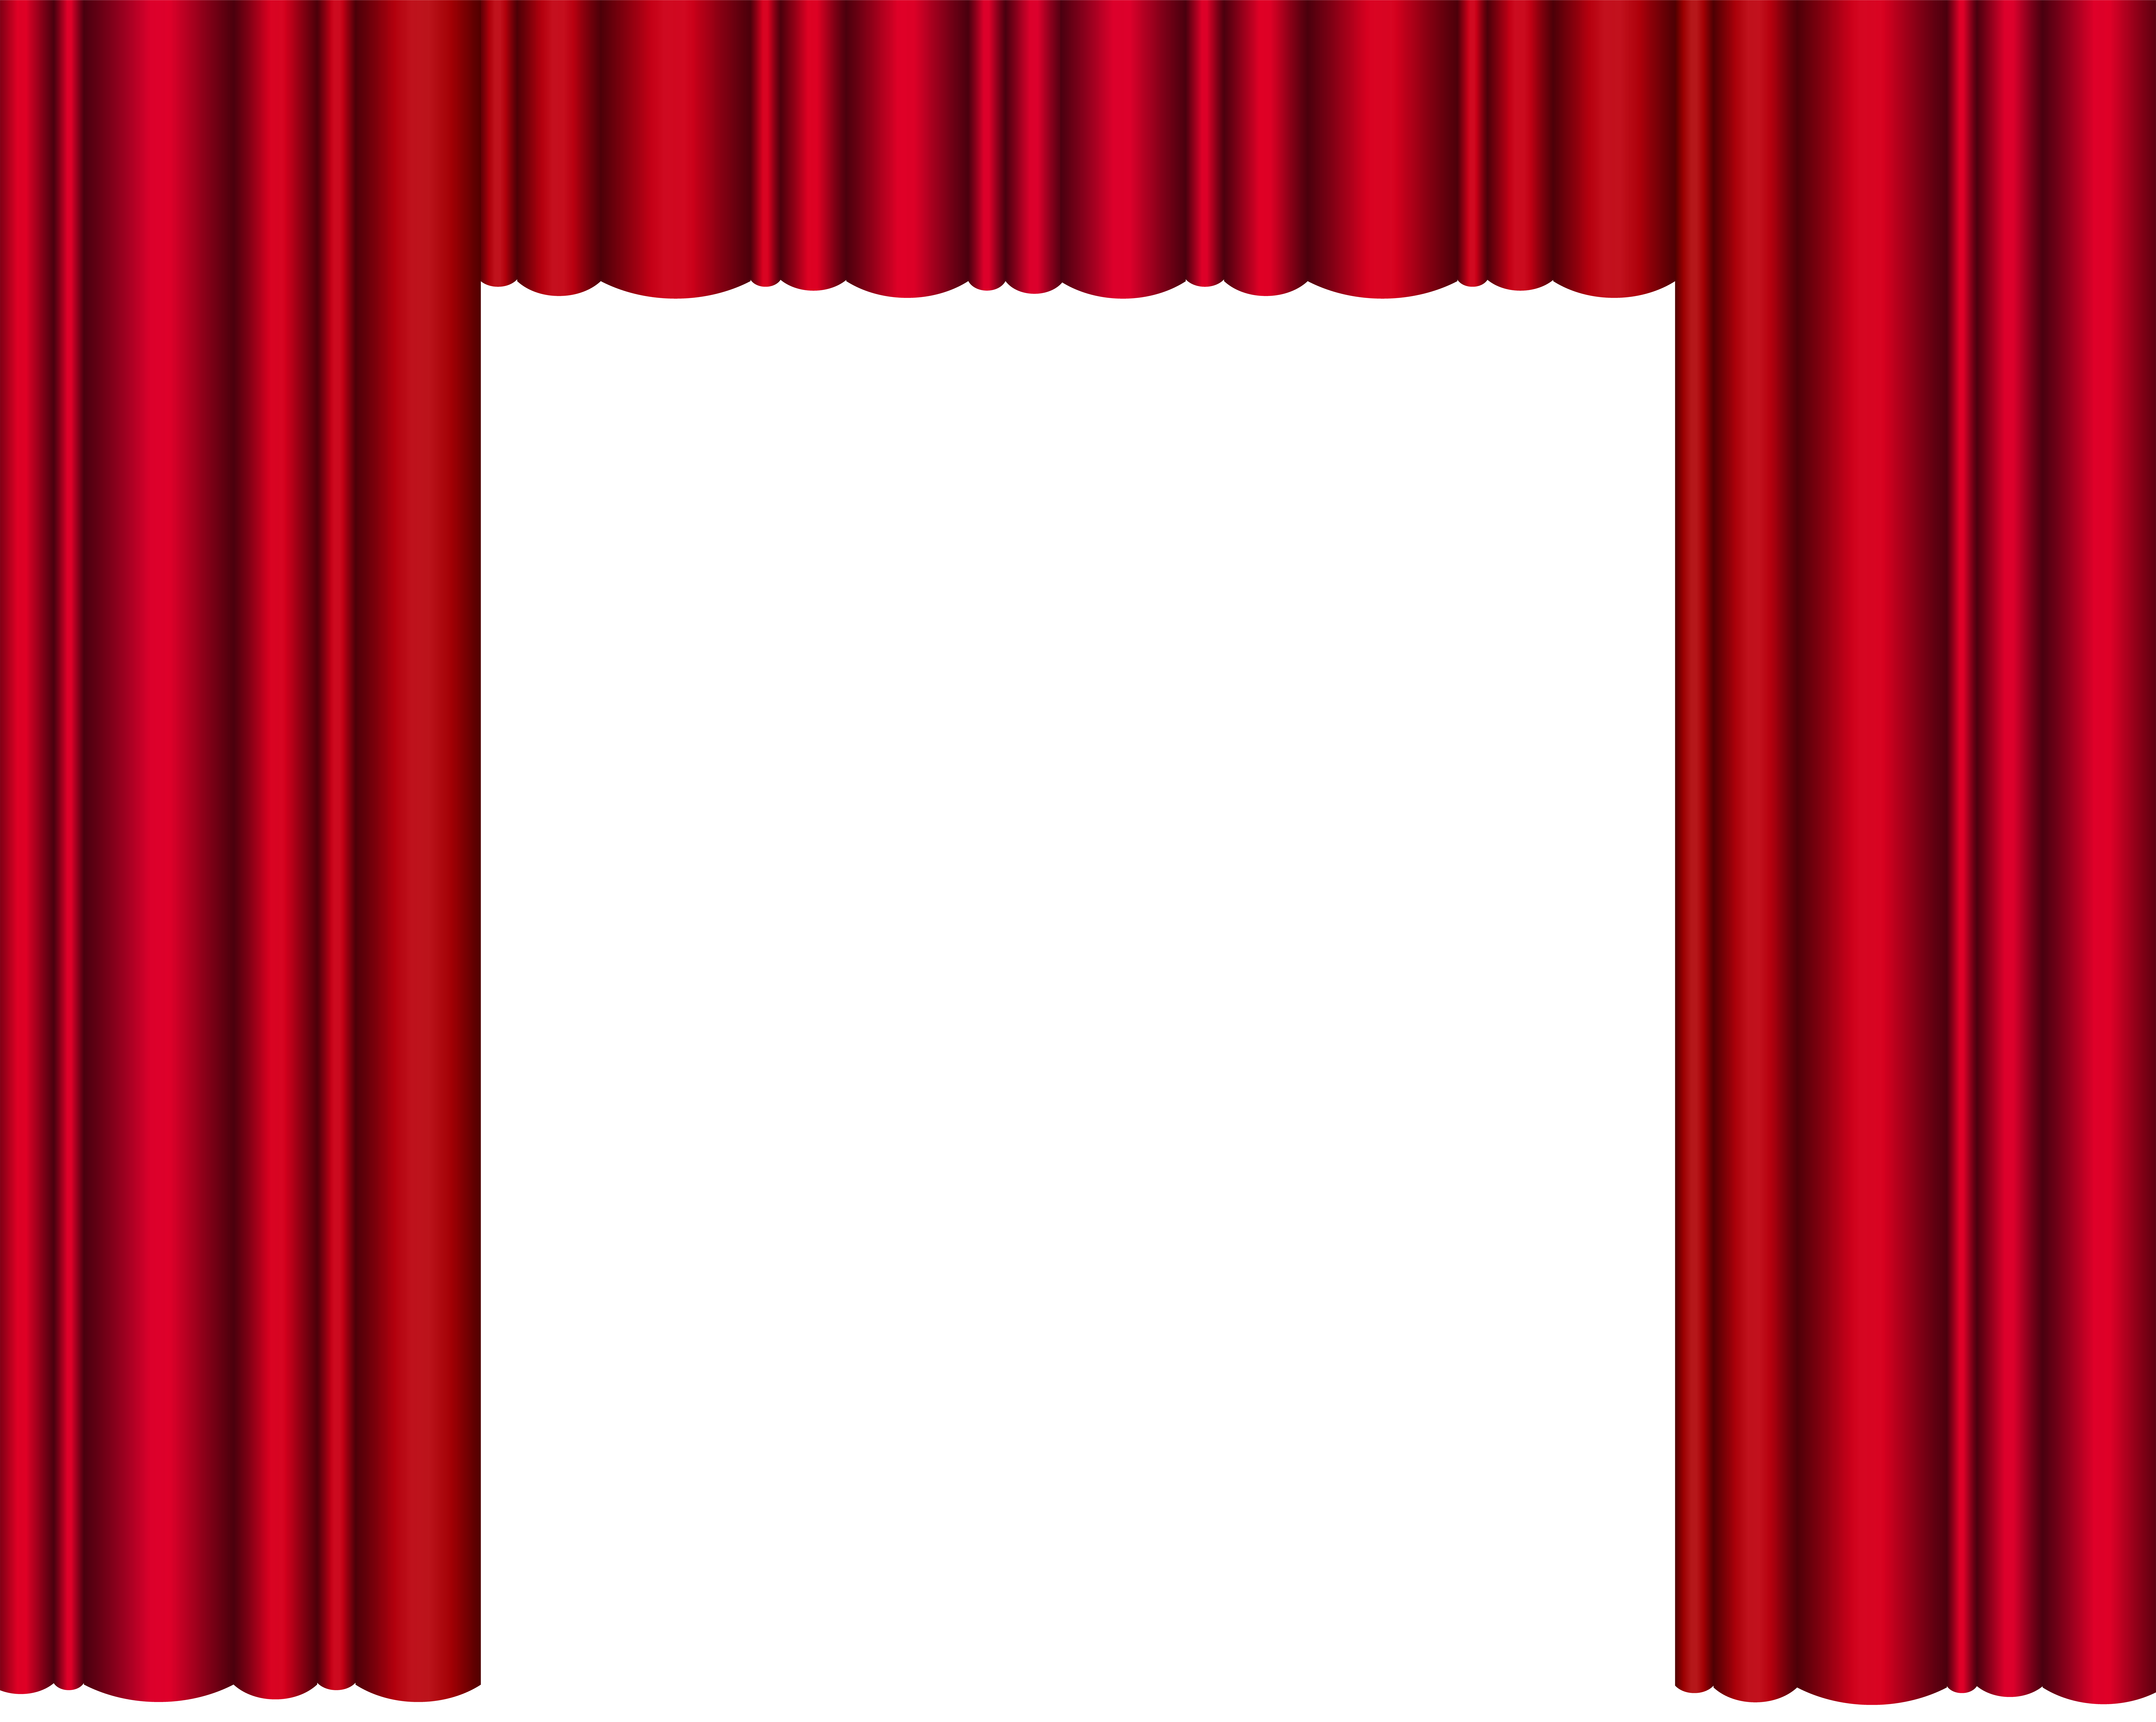 theatre clipart red stage curtain